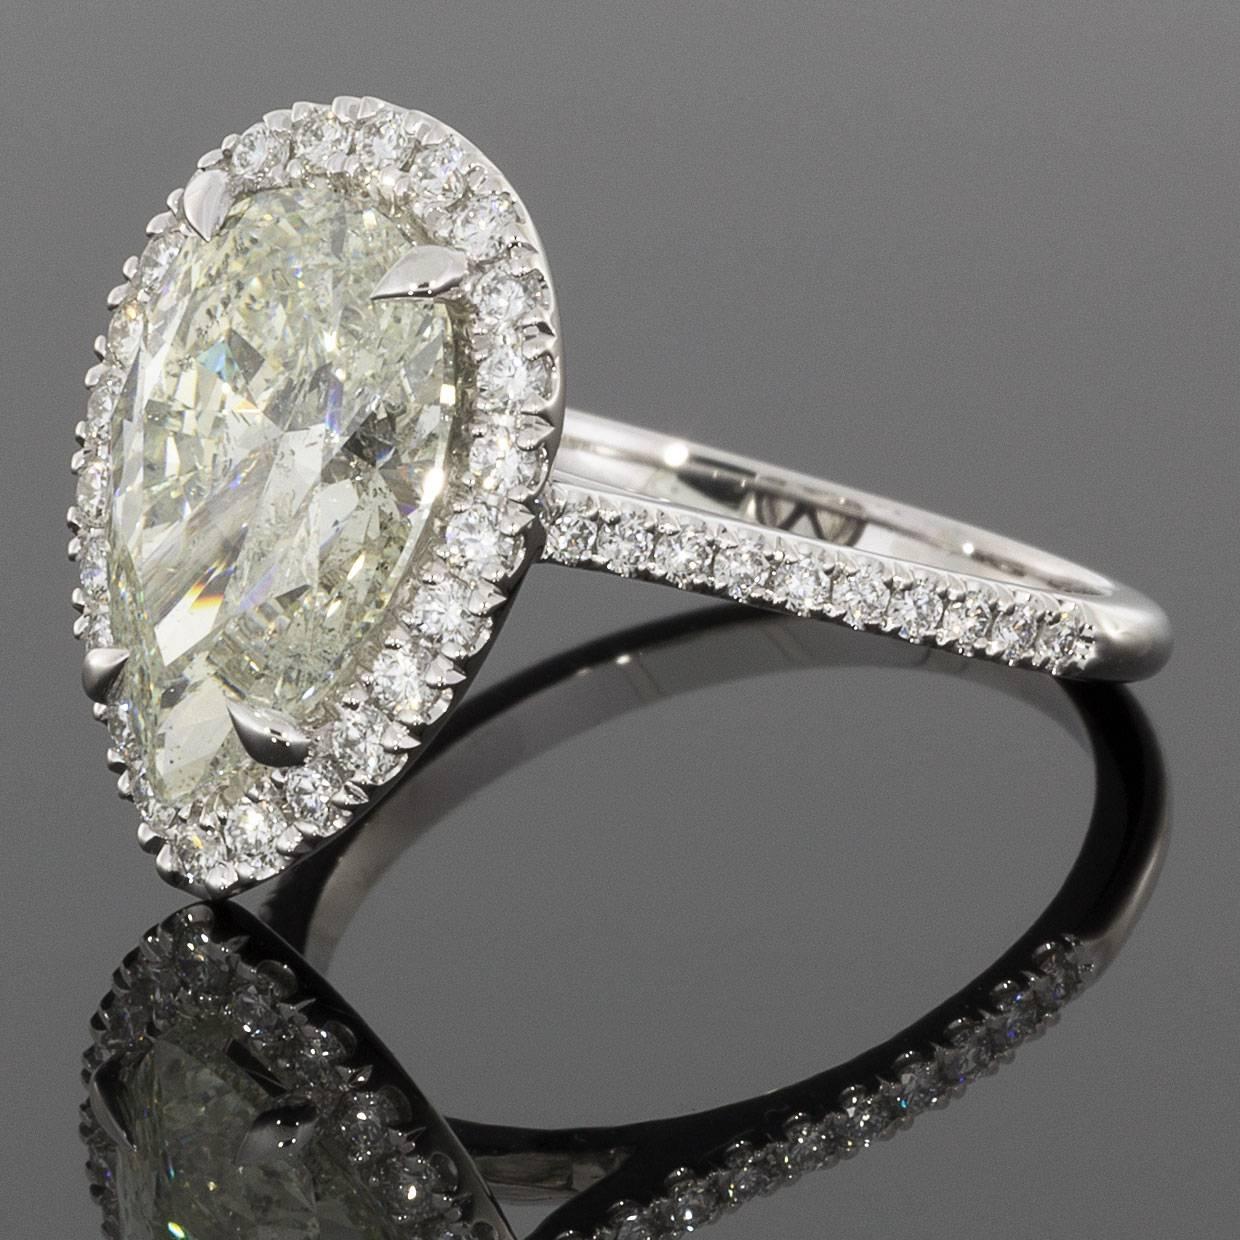 This absolutely stunning diamond halo ring will surely take your breath away! The custom made setting was designed to showcase its beautiful 3.23 carat pear brilliant center diamond. This diamond is EGL certified to be J/SI3 in quality. It is prong